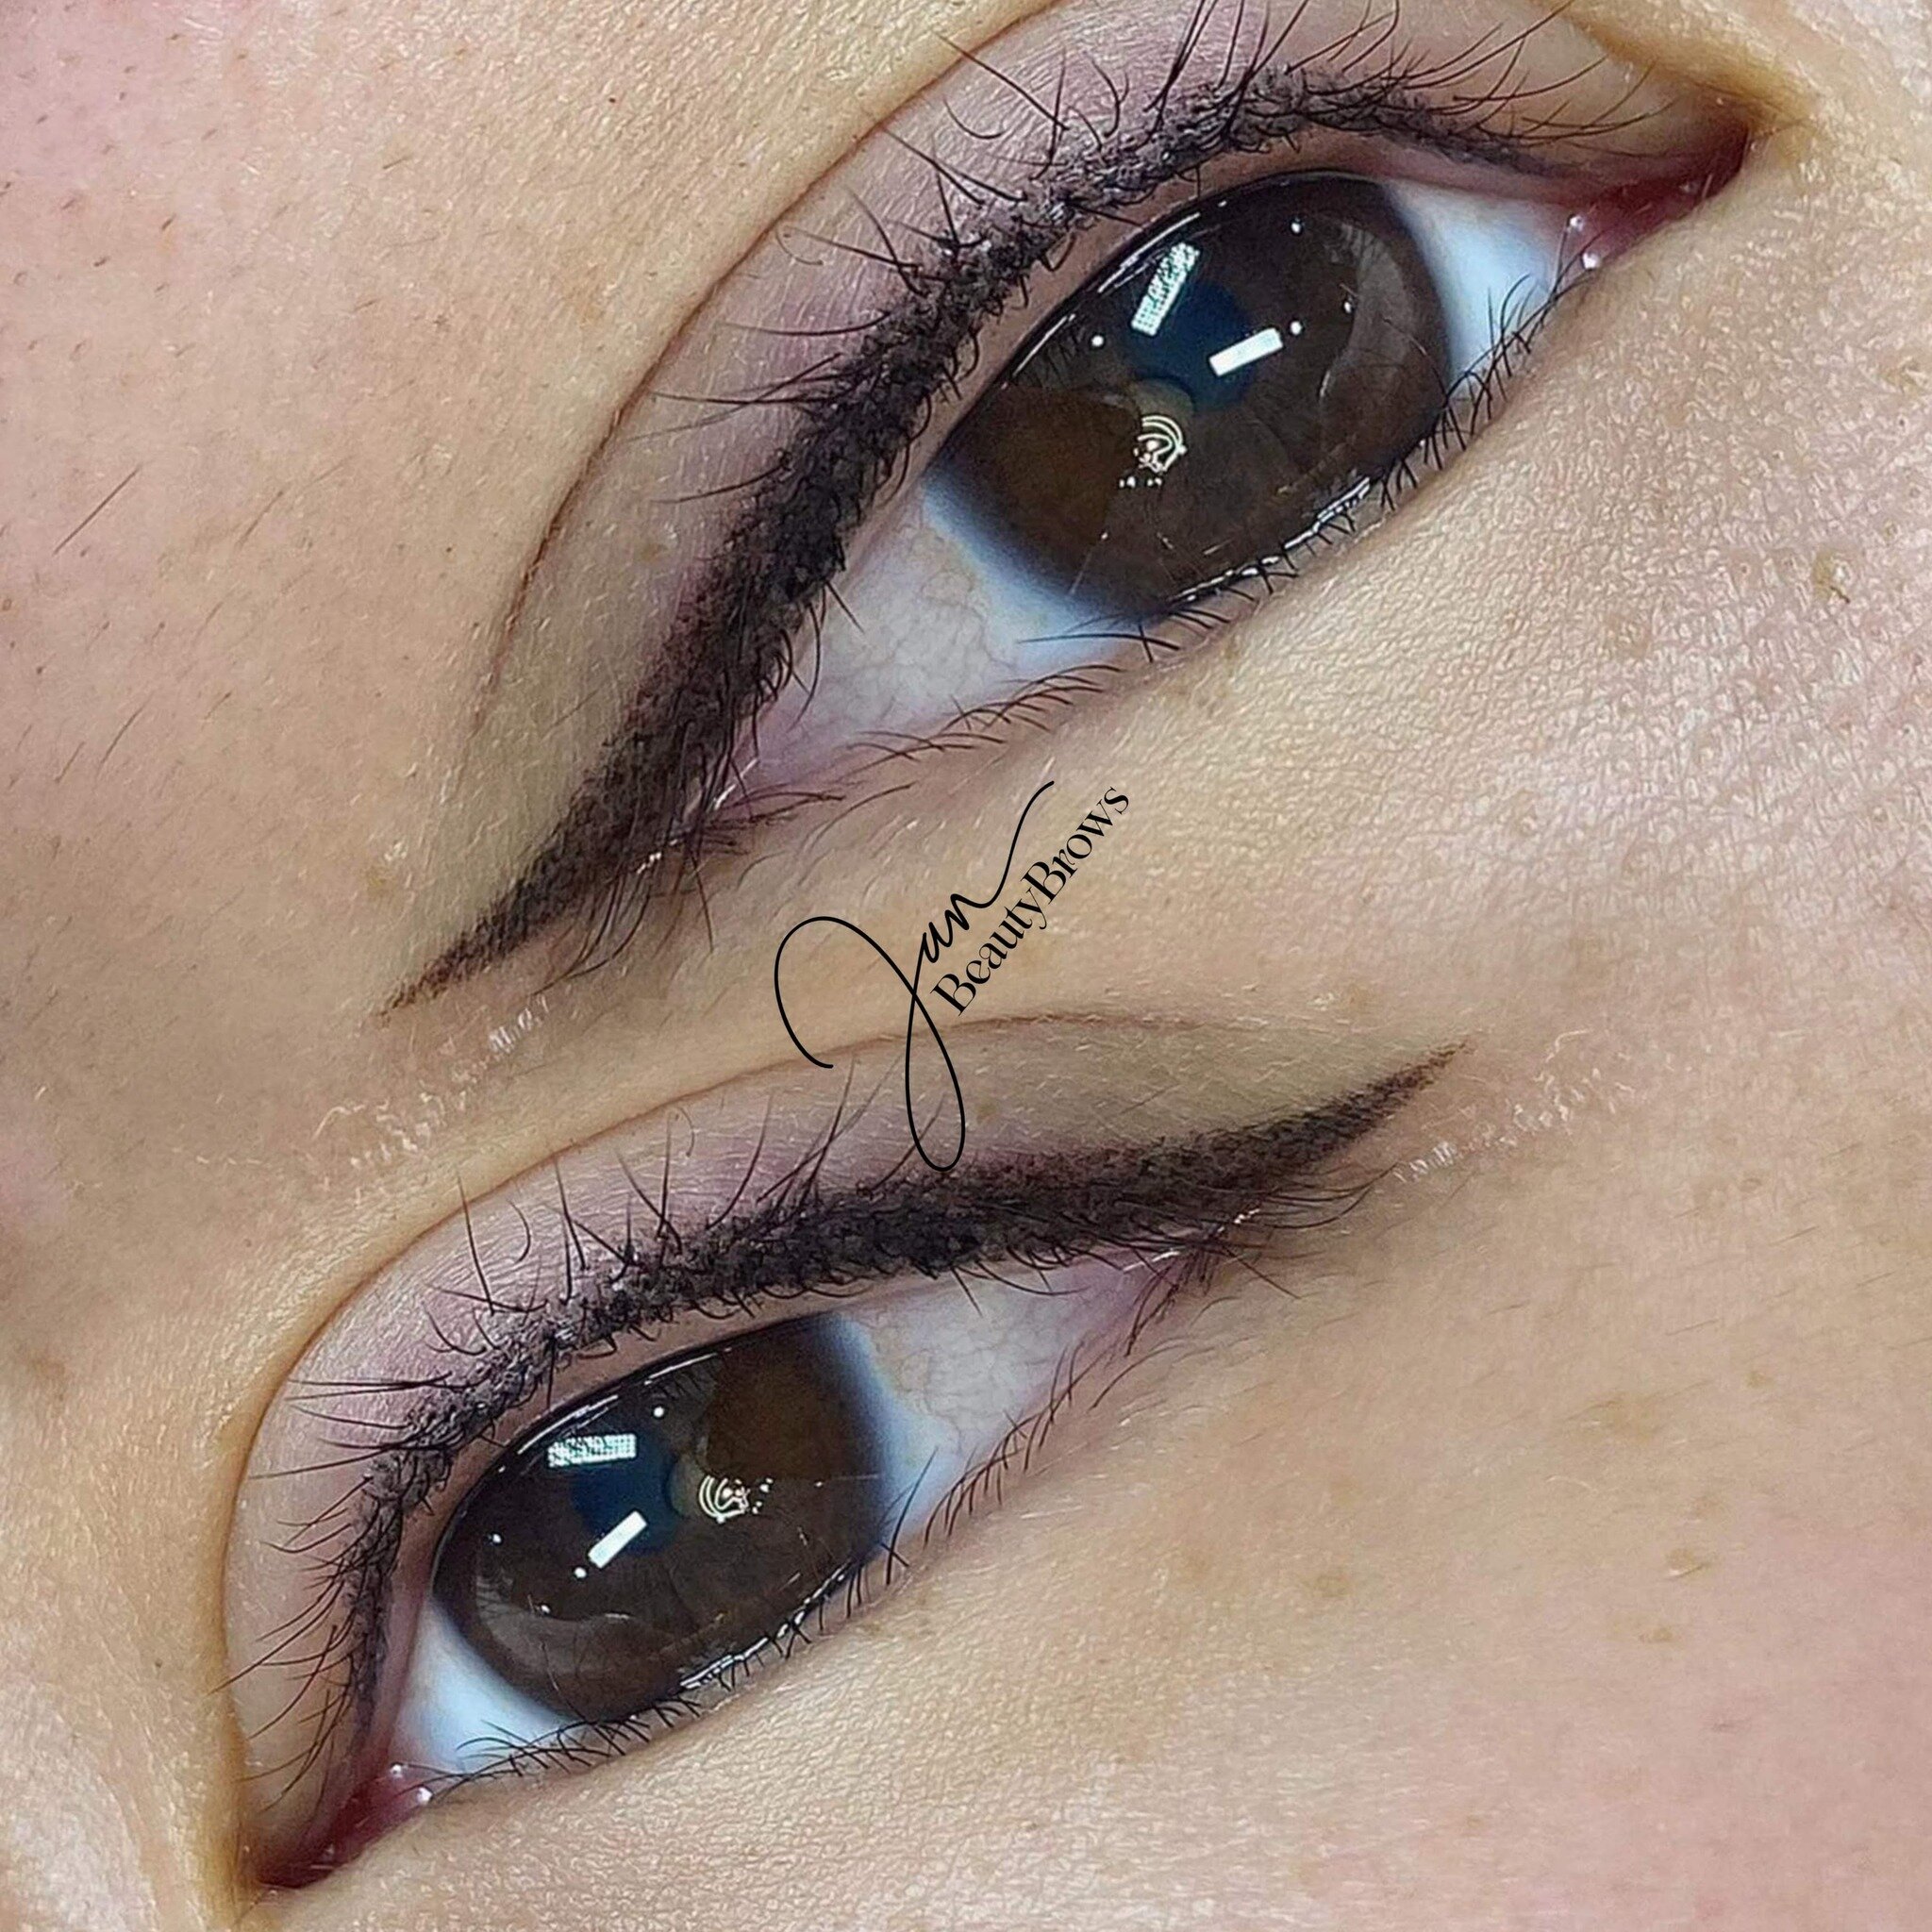 How long does it take you to draw a &quot;beautiful&quot; eyeliner? Why not having an eyeliner tattoo instead? 🥰🥰
 #eyelinertattootraining #eyelinerhacks #eyelineronpoint #eyelinertattoo #eyelinertutorial #eyeliner #softeyeliners #eyeliner